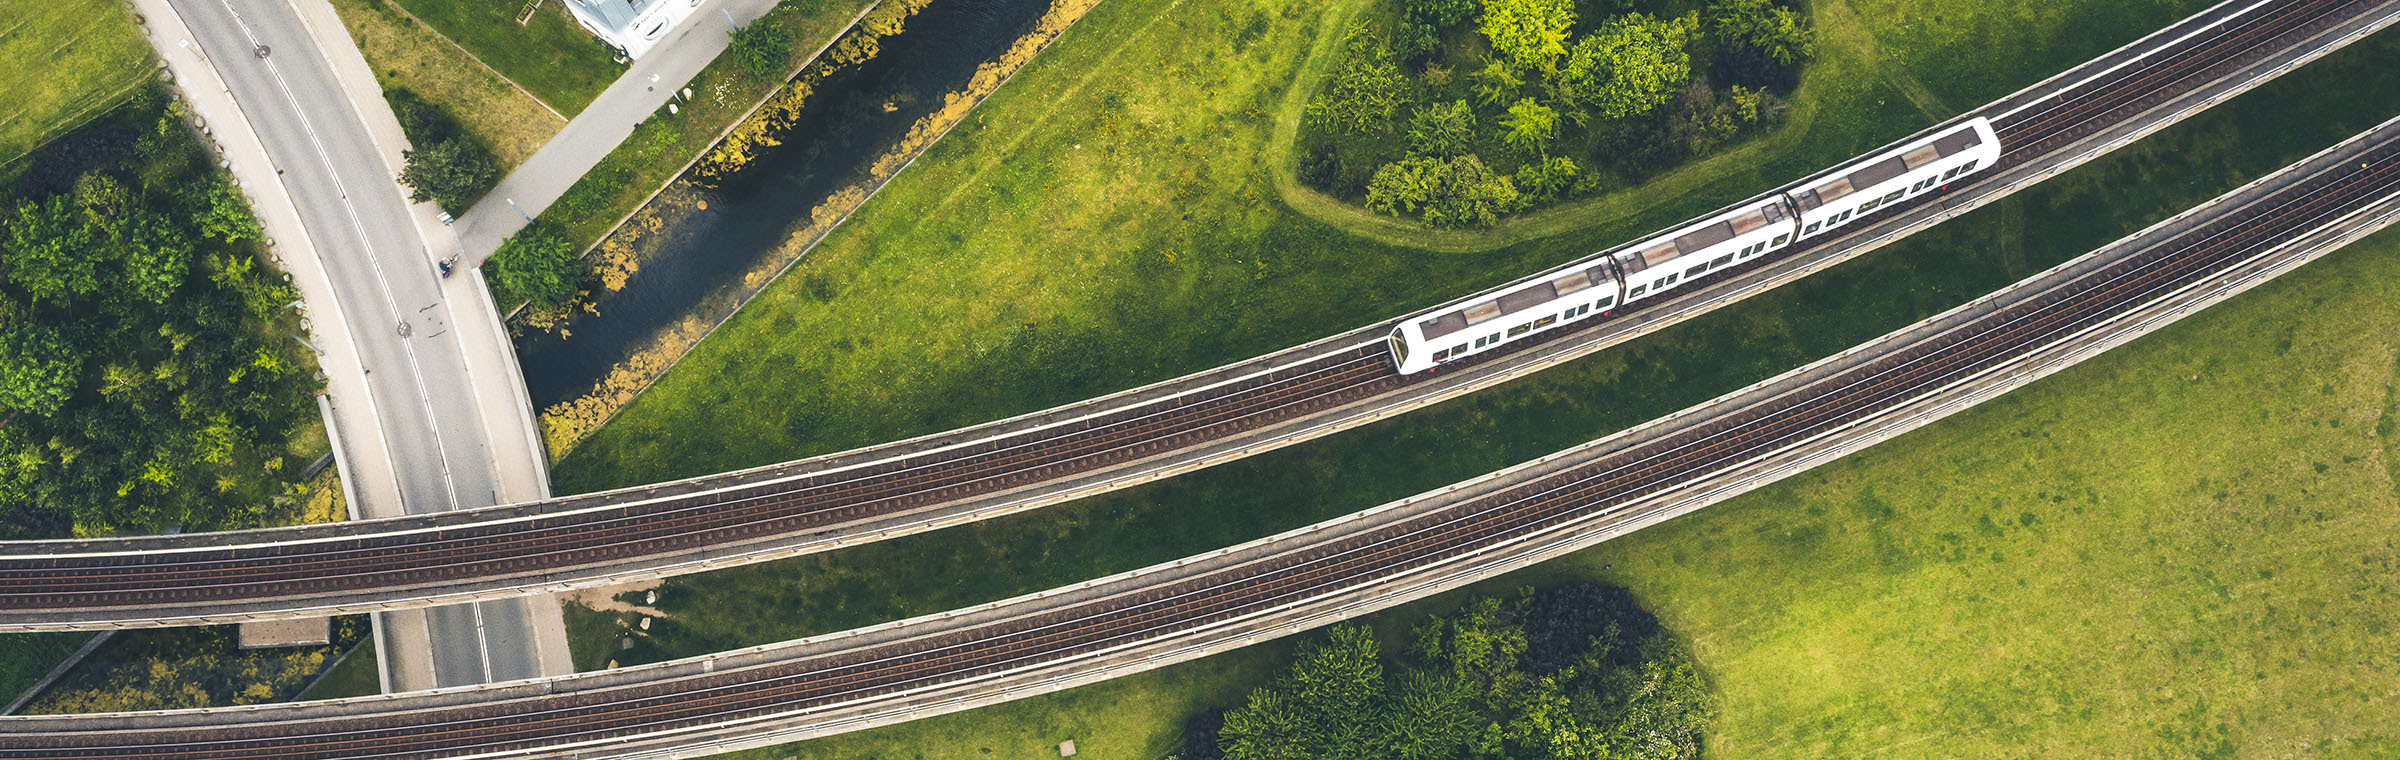 aerial view of a modern train on tracks